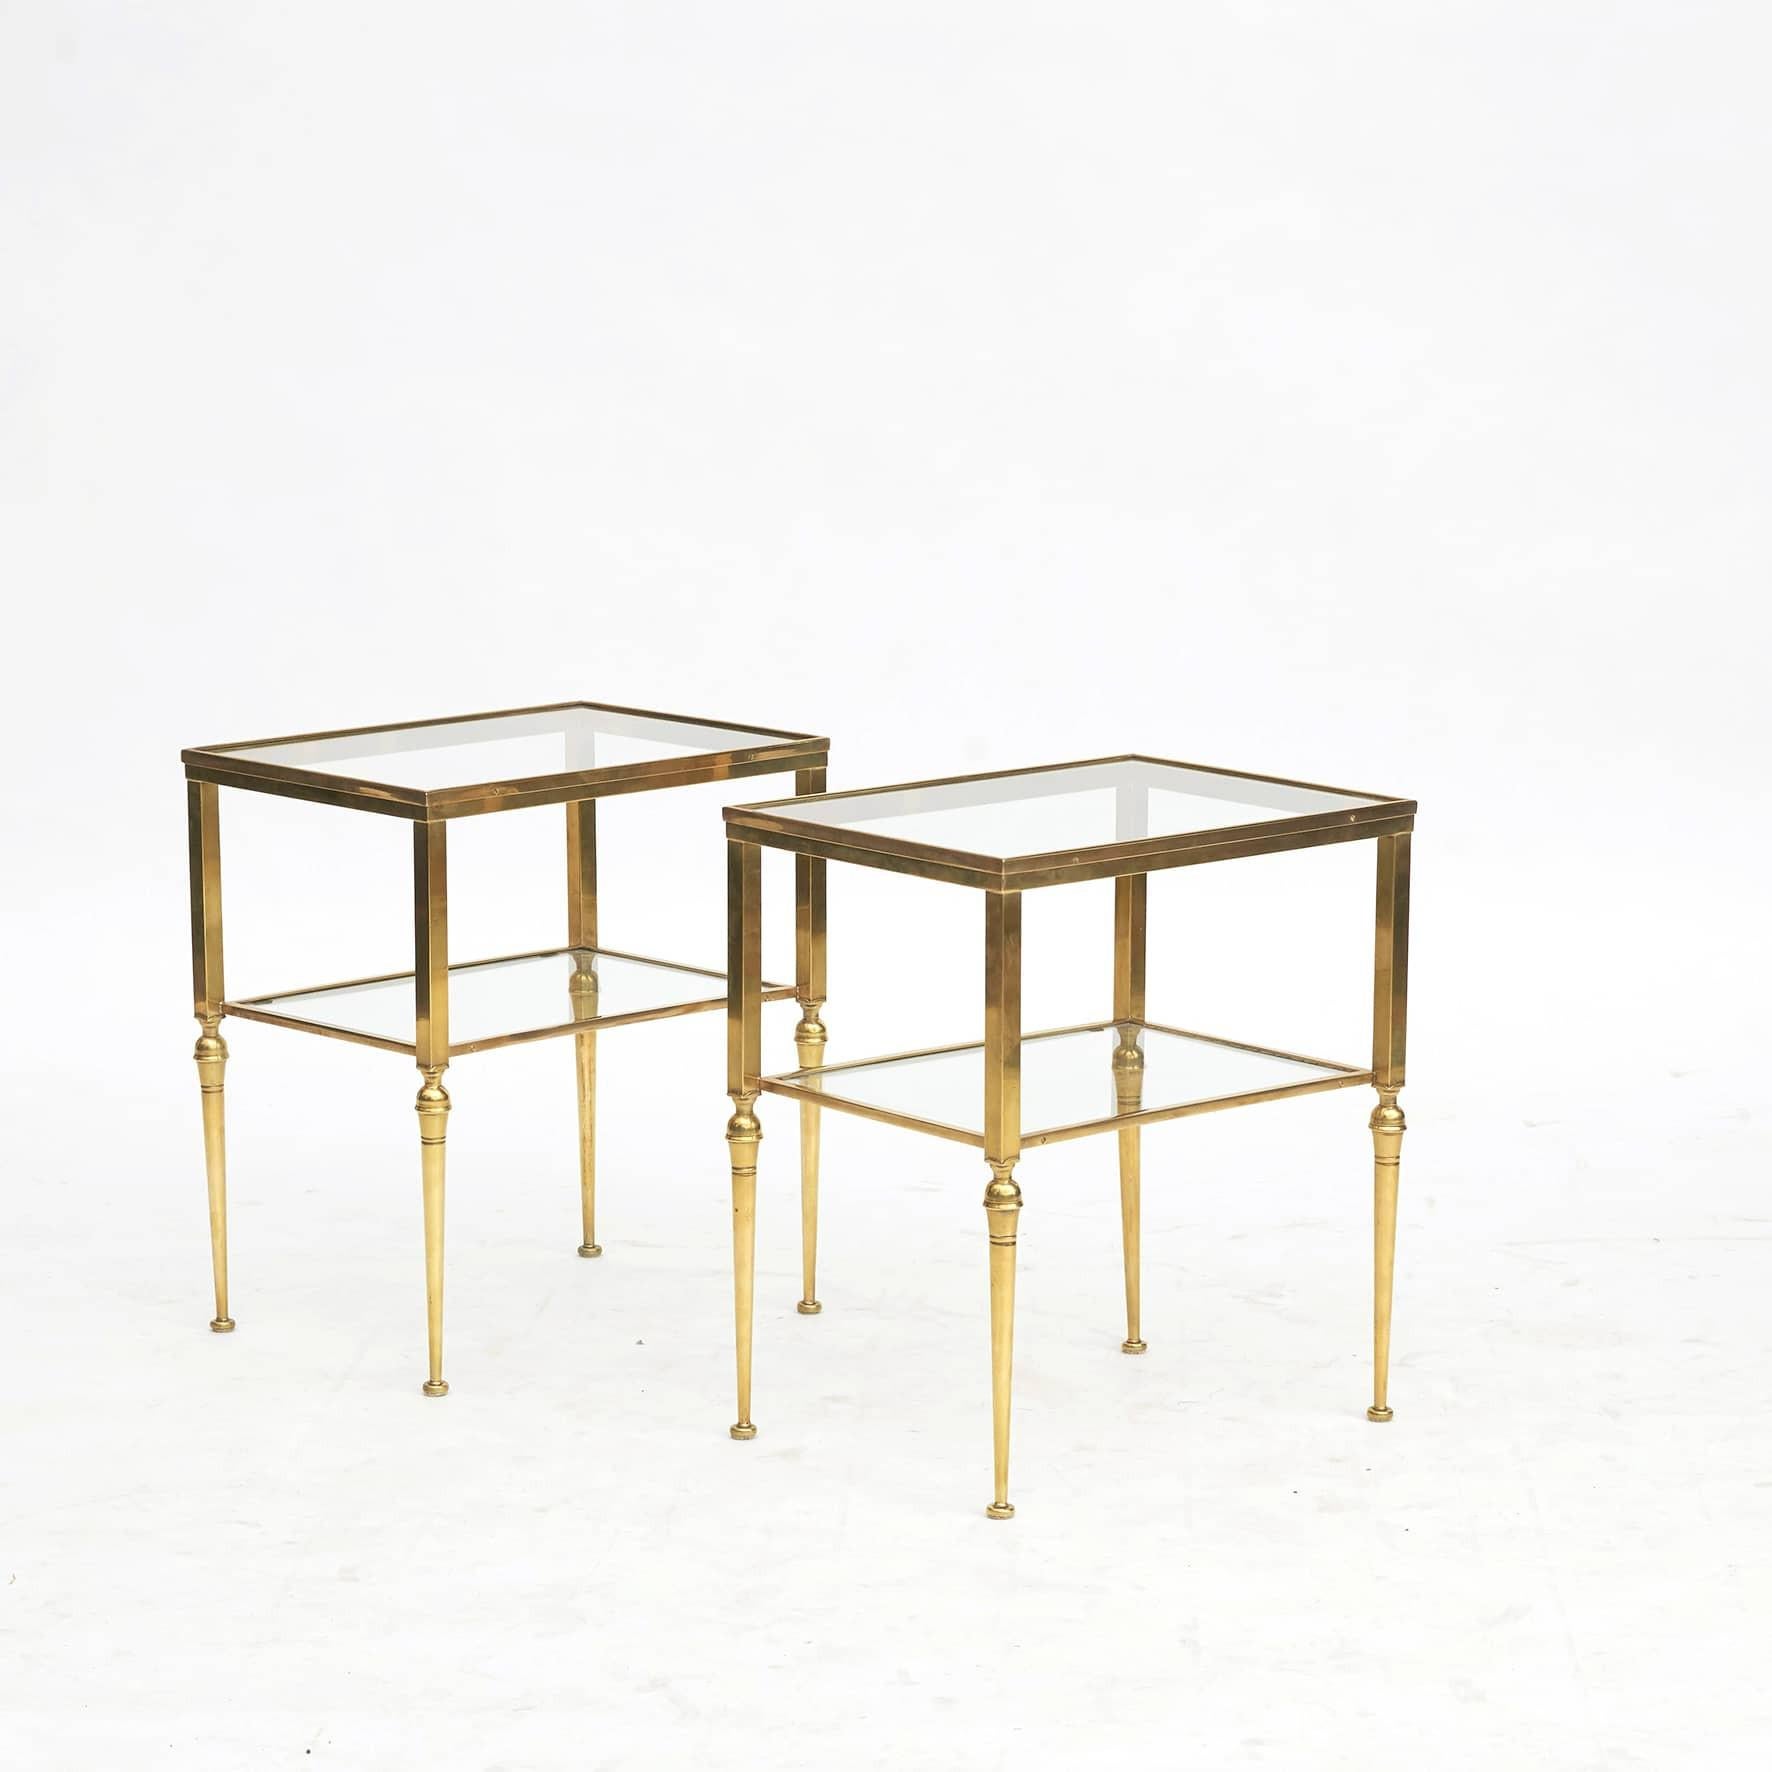 Pair of Italian two-tier brass side tables with clear glass inlay tops.
Elegant finish and pure lines.
Italy 1960-1970.
Sold as a pair.